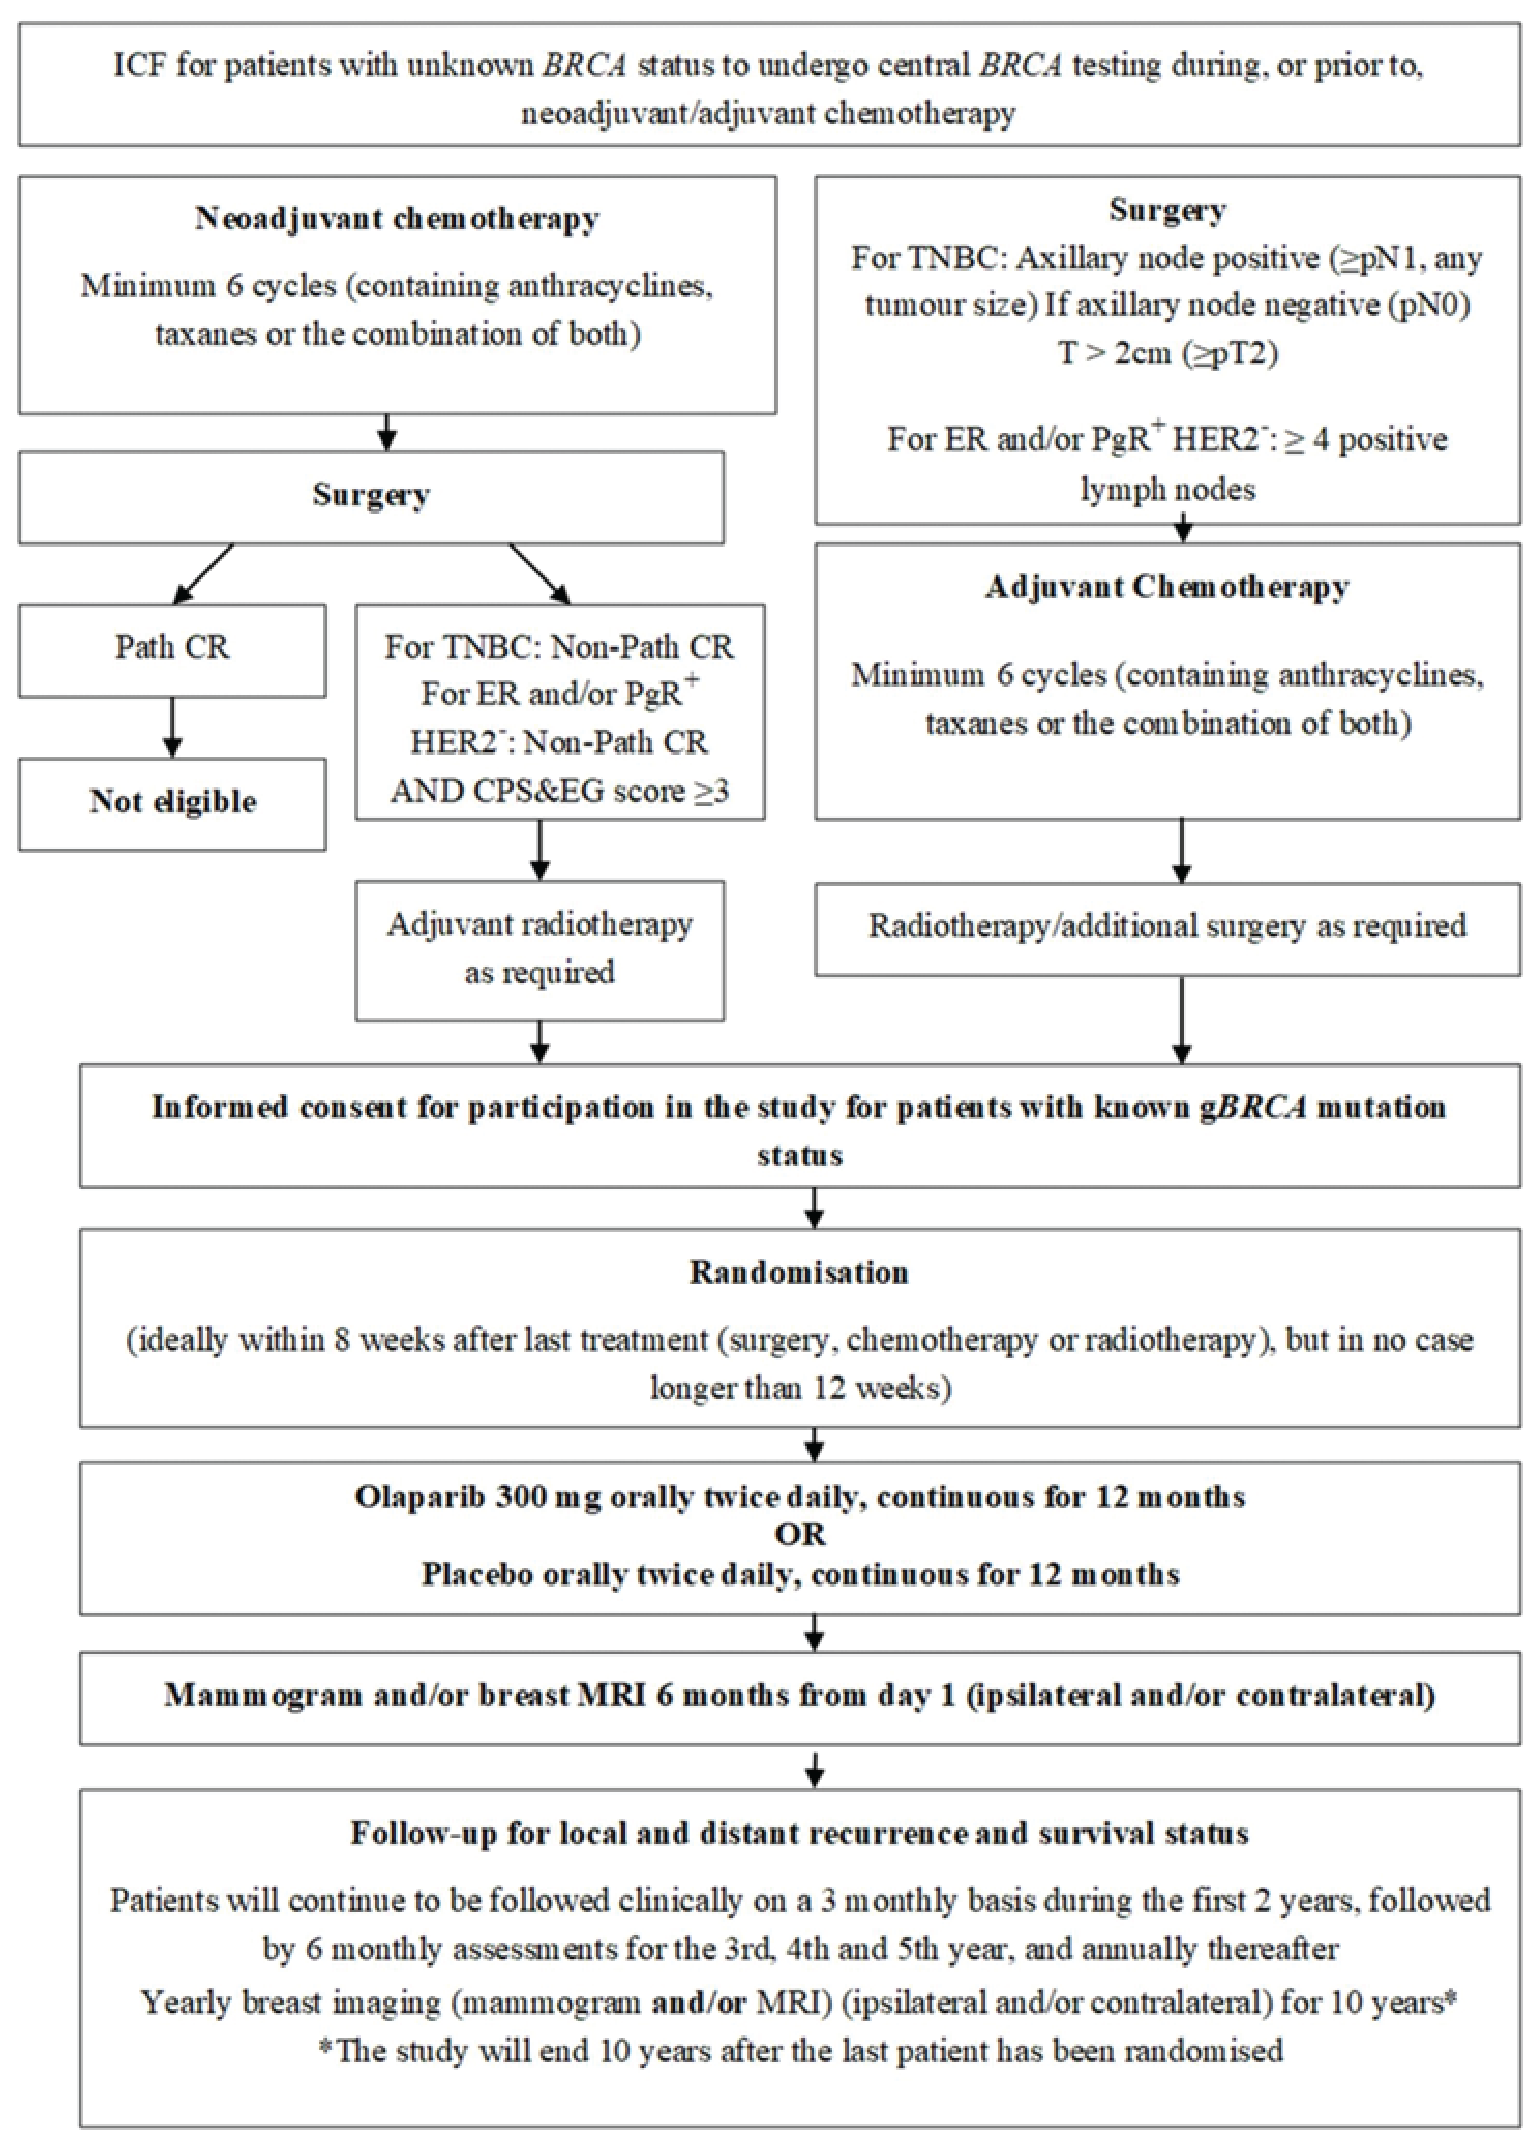 After screening parts 1 and 2, patients were randomized in a 1:1 ratio to receive either olaparib at 300 mg twice daily or matching placebo in a double-blind manner. The randomization of patients was stratified by hormone receptor status (ER or PgR), HER2-negative versus TNBC, prior neoadjuvant versus adjuvant chemotherapy, and prior platinum use for breast cancer. Patients must have completed all local therapy and at least 6 cycles of neoadjuvant or adjuvant chemotherapy. The patient should have been randomized to the OlympiA study, ideally within a maximum of 8 weeks after the completion of the last treatment, including surgery, chemotherapy, or radiation therapy, but in no case longer than 12 weeks. Treatment with olaparib was given for up to 12 months or until disease recurrence or unacceptable toxicity, whichever occurred first. Safety and clinical assessments were performed for approximately 10 years. The study will end approximately 10 years after the last patient was randomized.